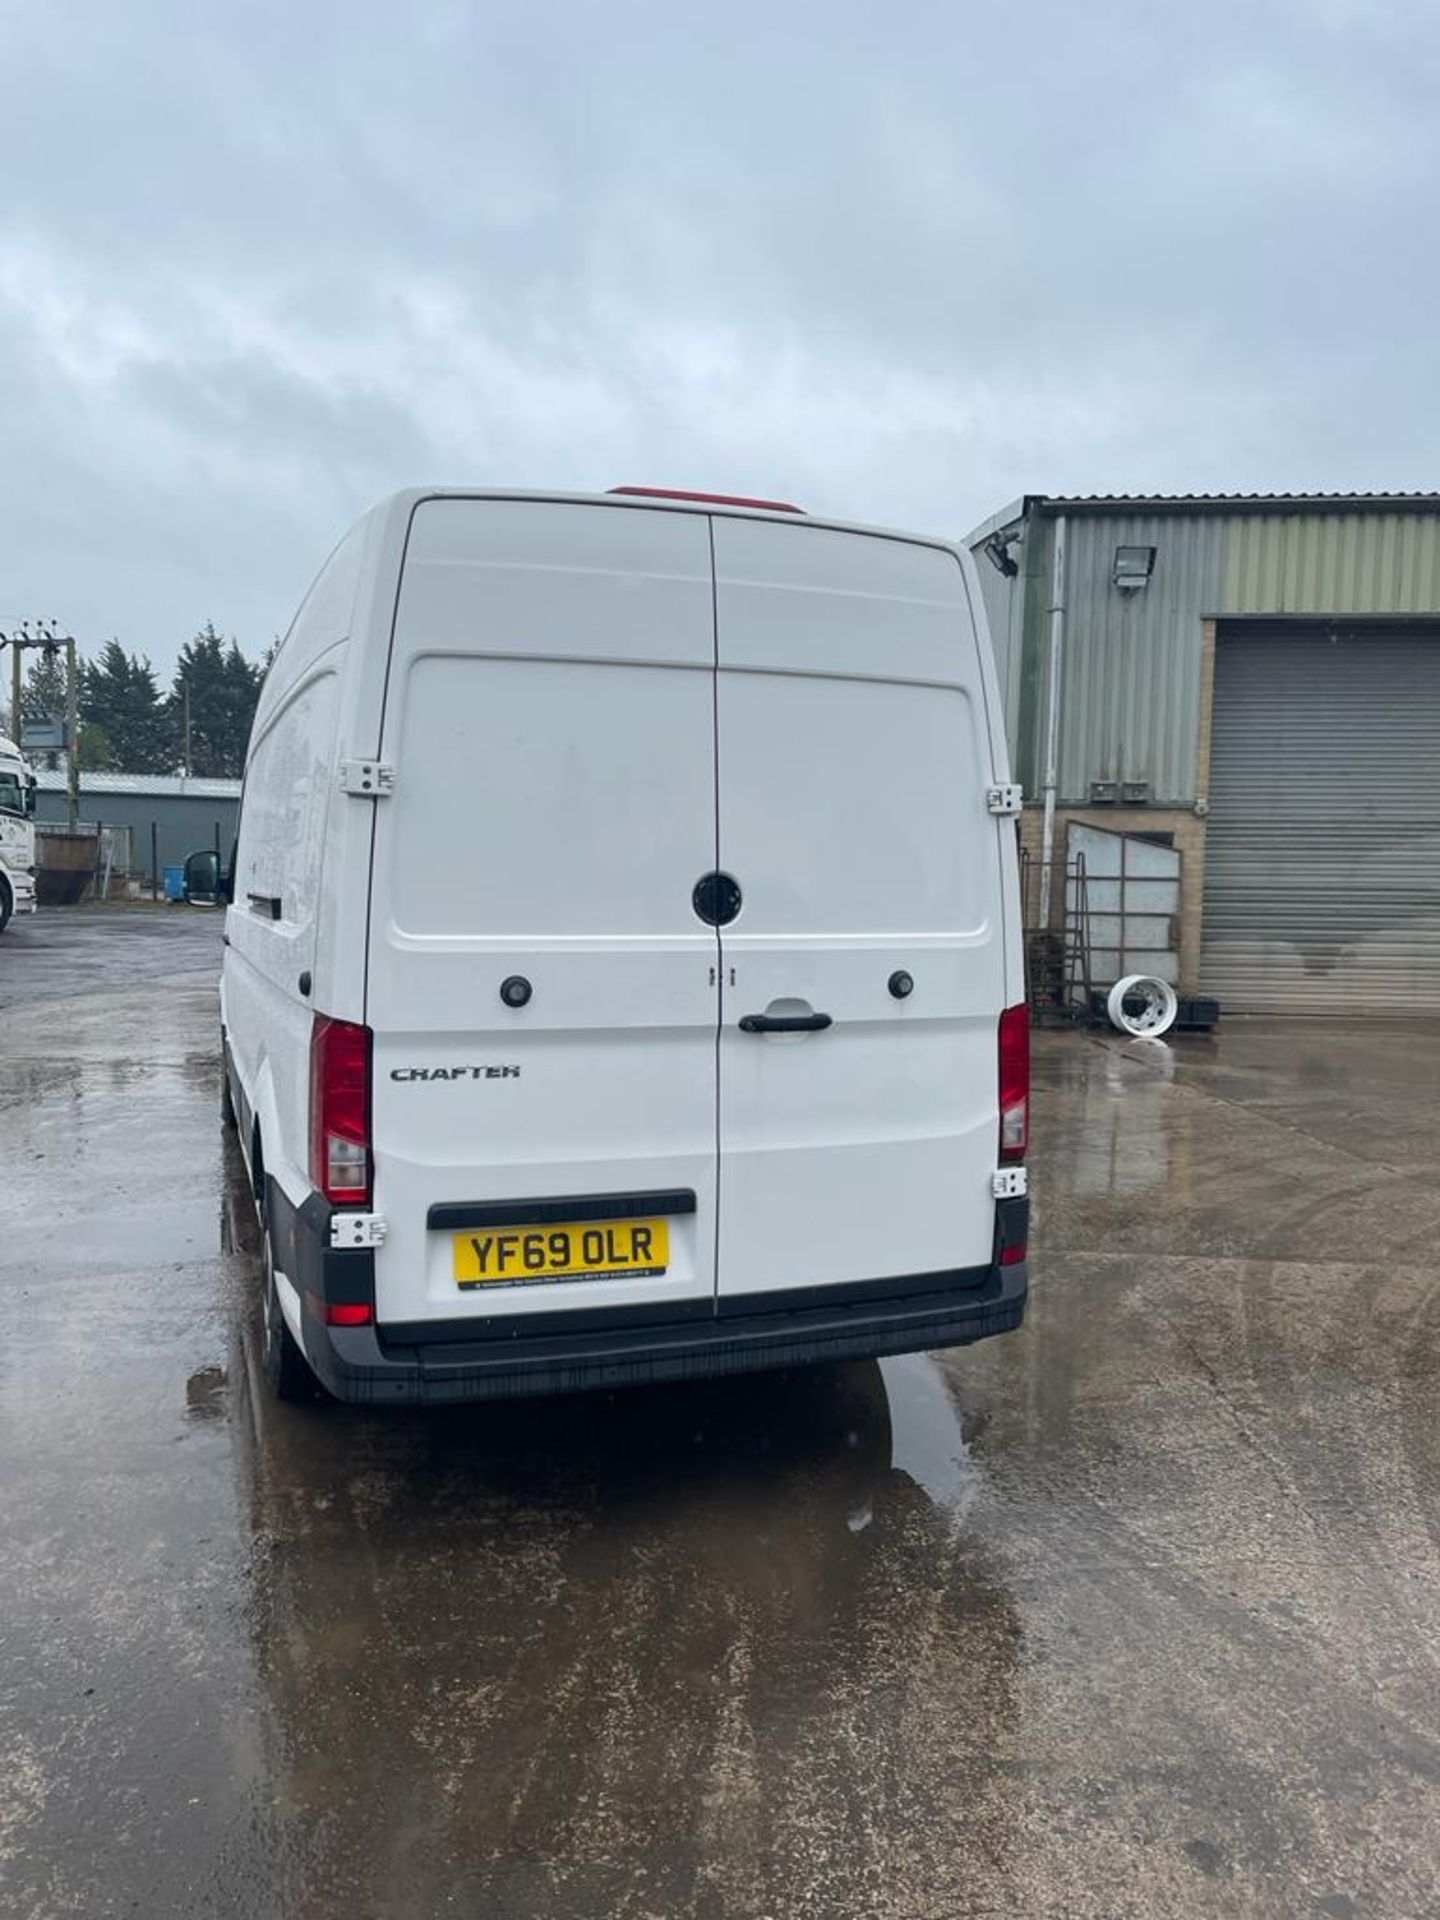 2019, Volkswagen Crafter CR35 TDI Blue Motion - Euro 6 ULEZ Compliant - Image 4 of 8